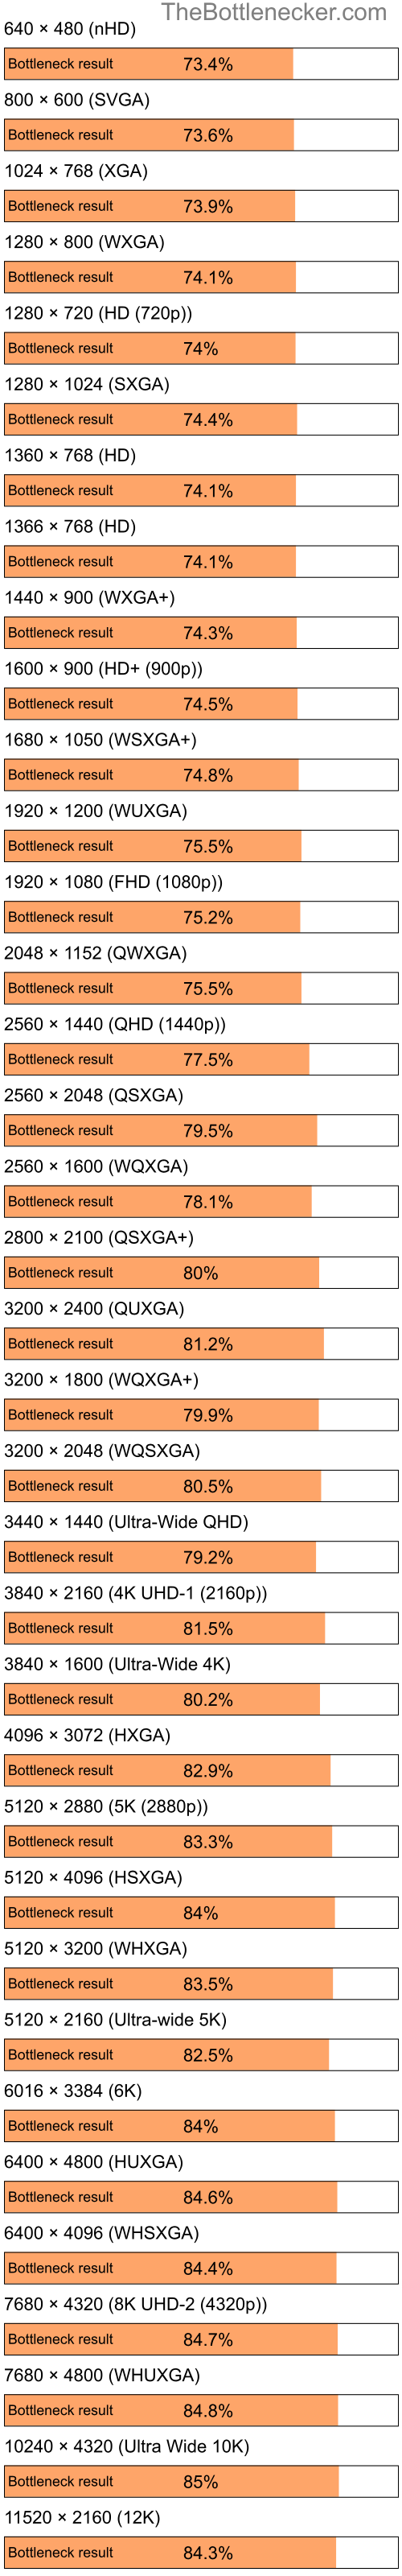 Bottleneck results by resolution for Intel Atom Z520 and NVIDIA Quadro FX 350M in General Tasks